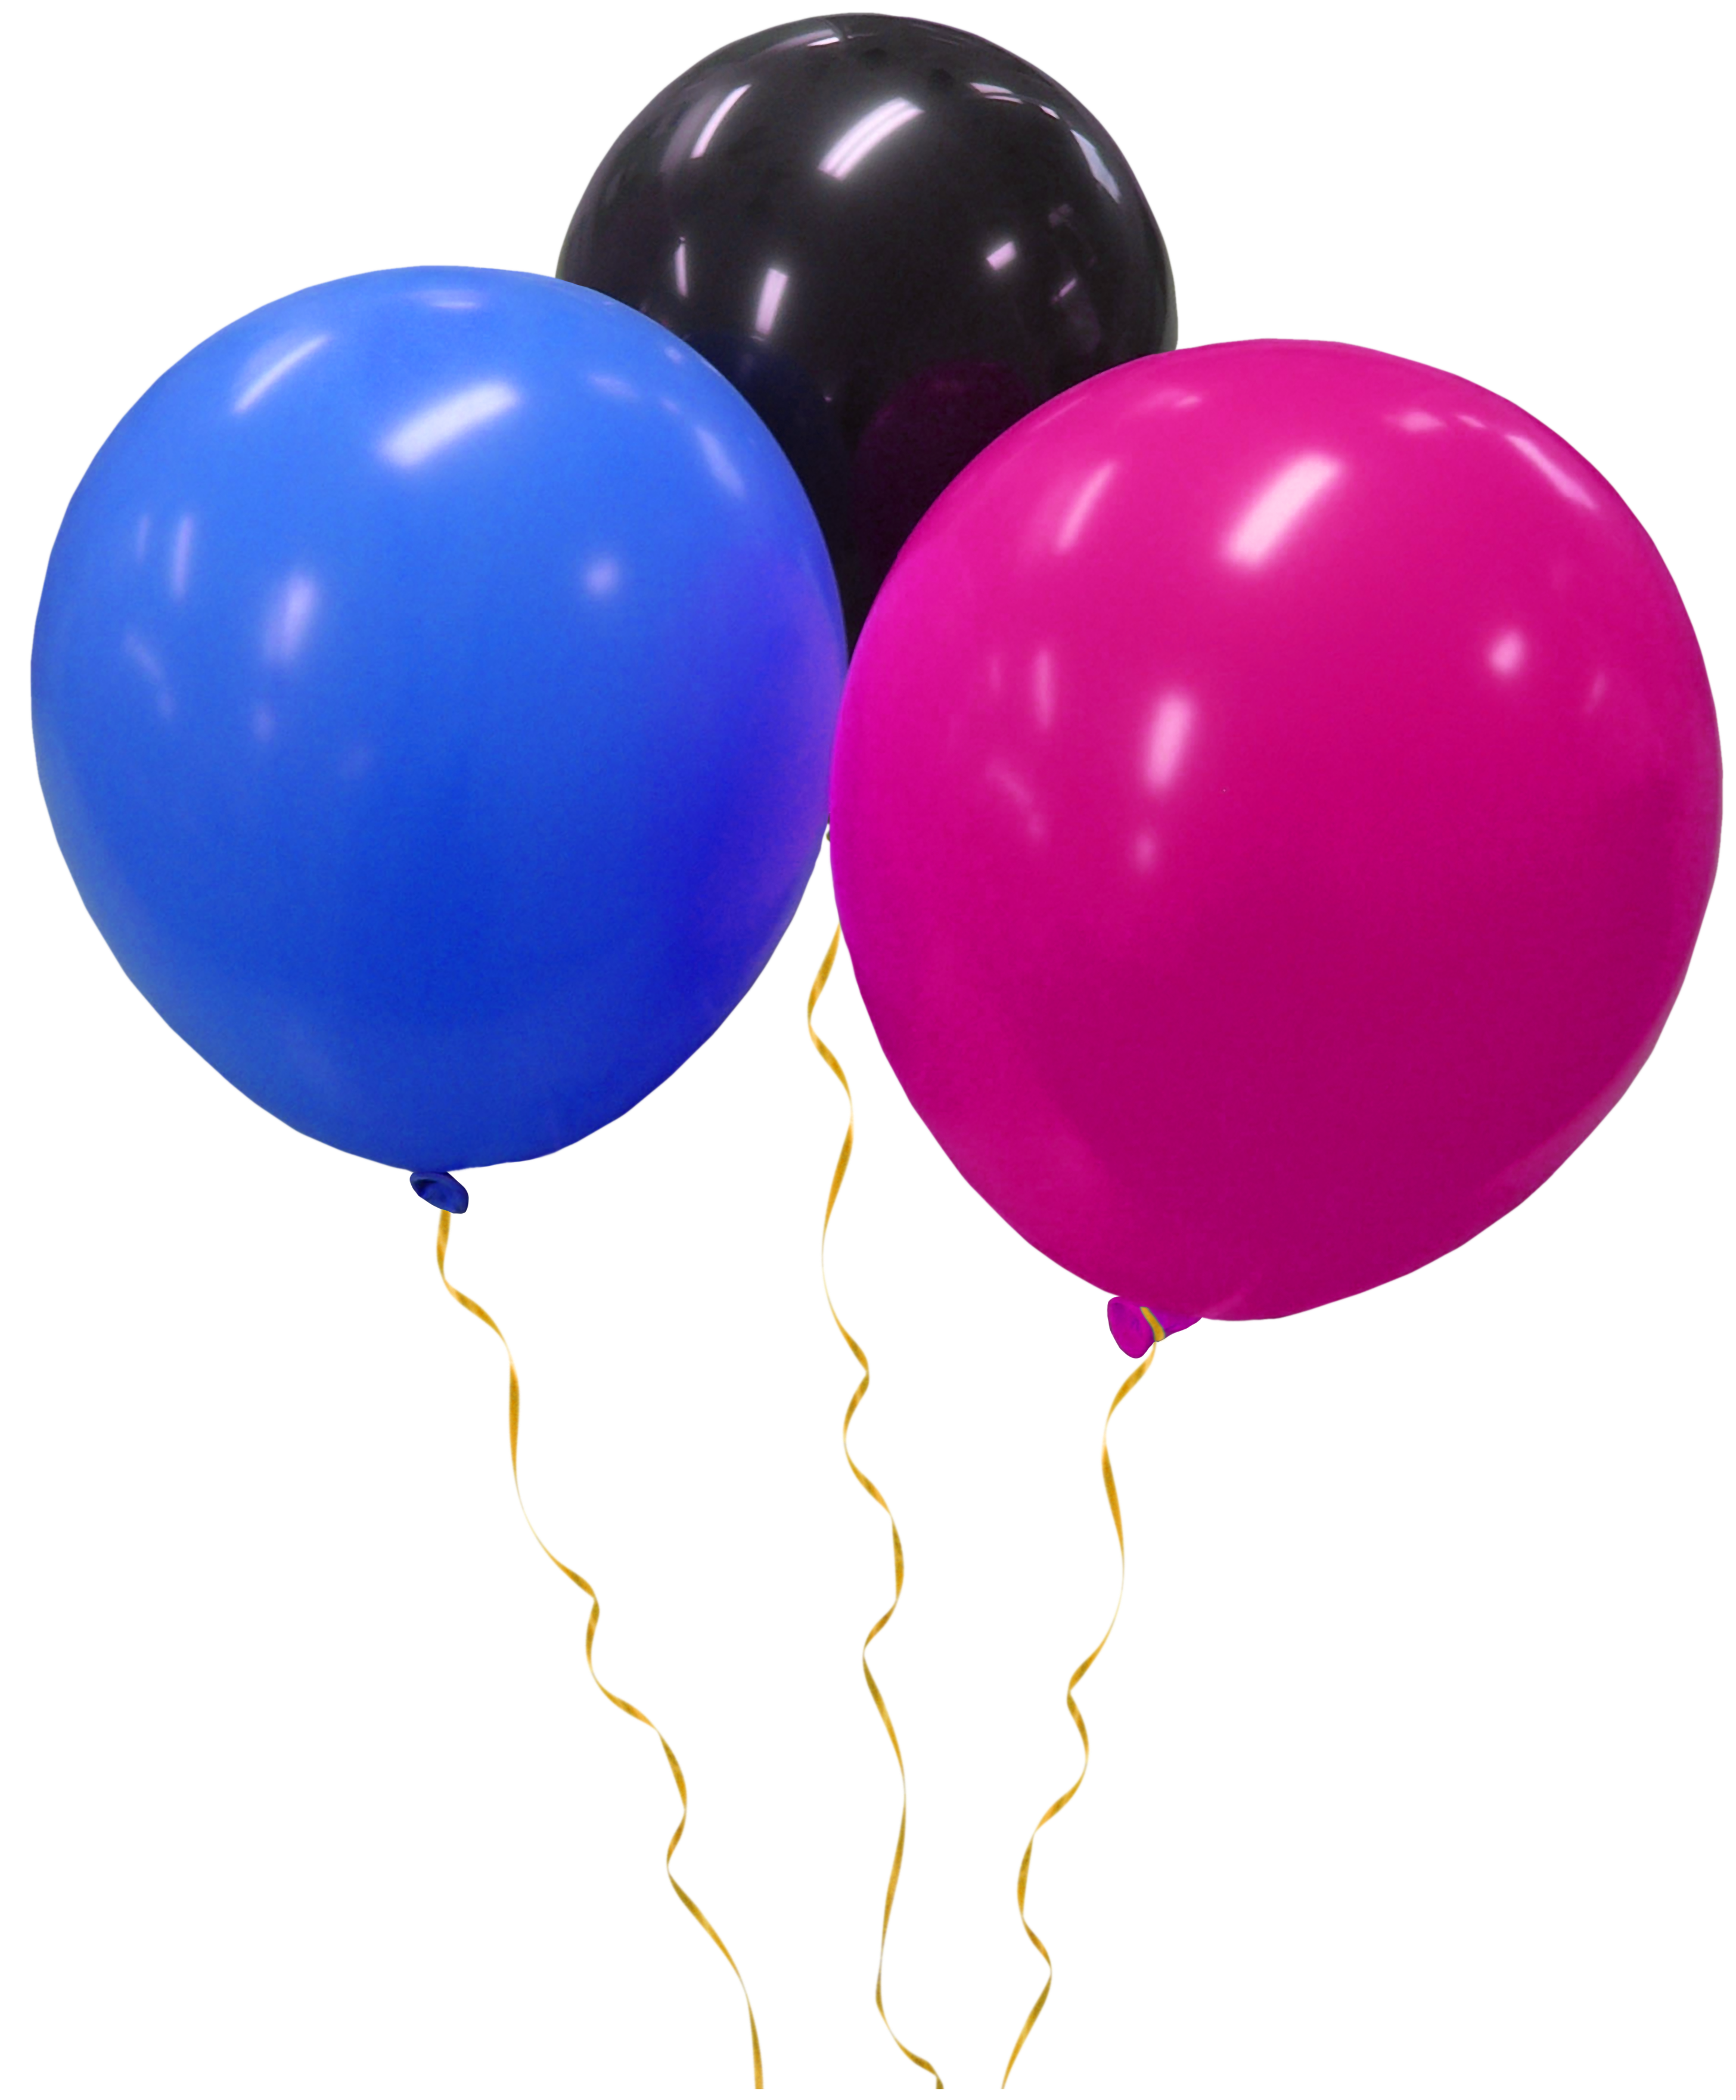 Transparent_Three_Balloons_Clipart.png?m=1381010400